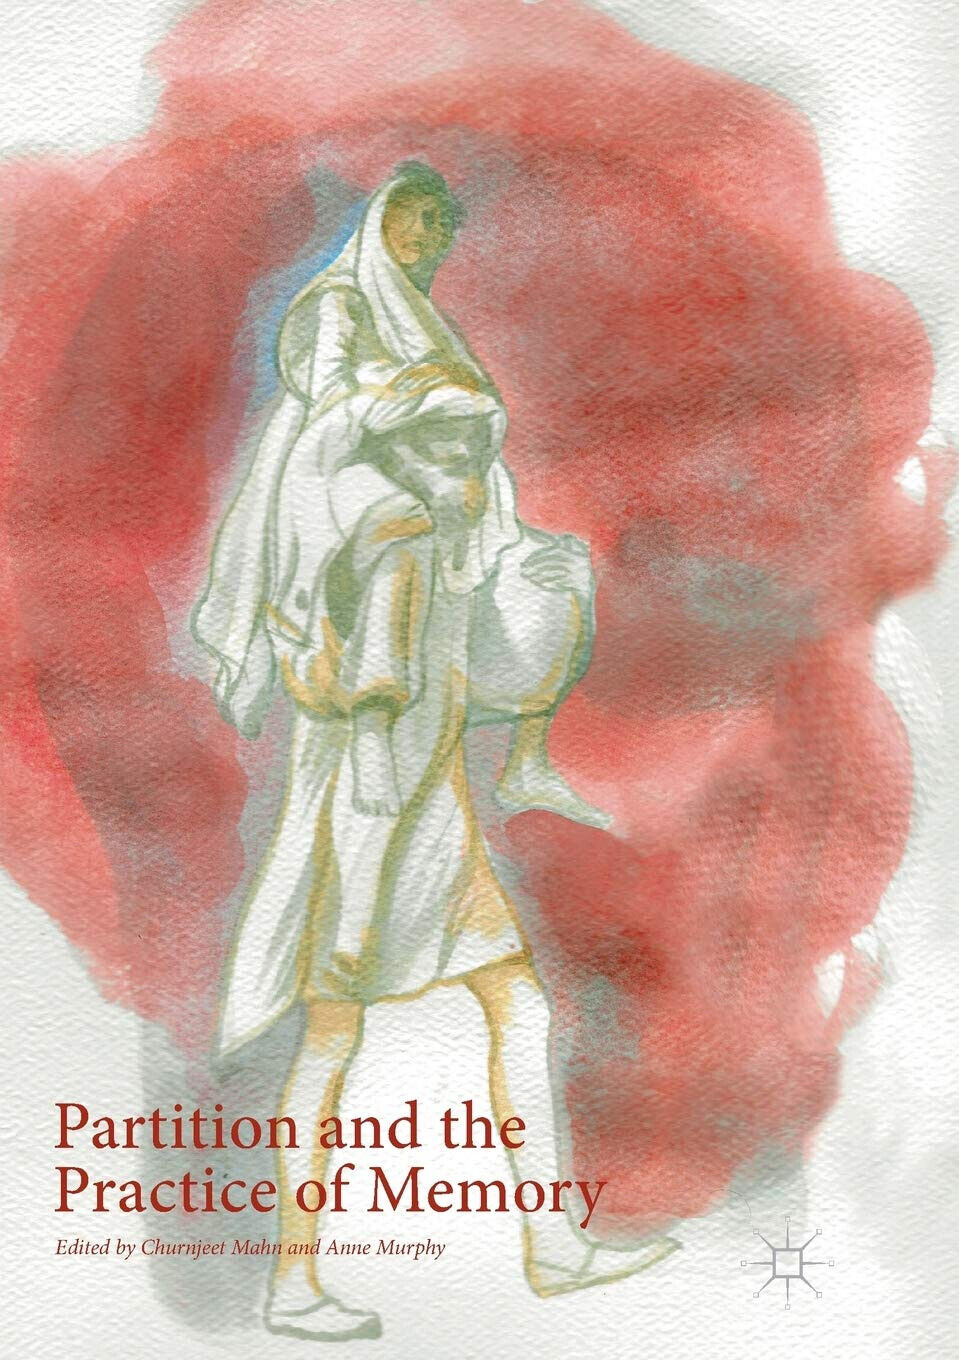 Partition and the Practice of Memory - Churnjeet Mahn - Palgrave, 2018